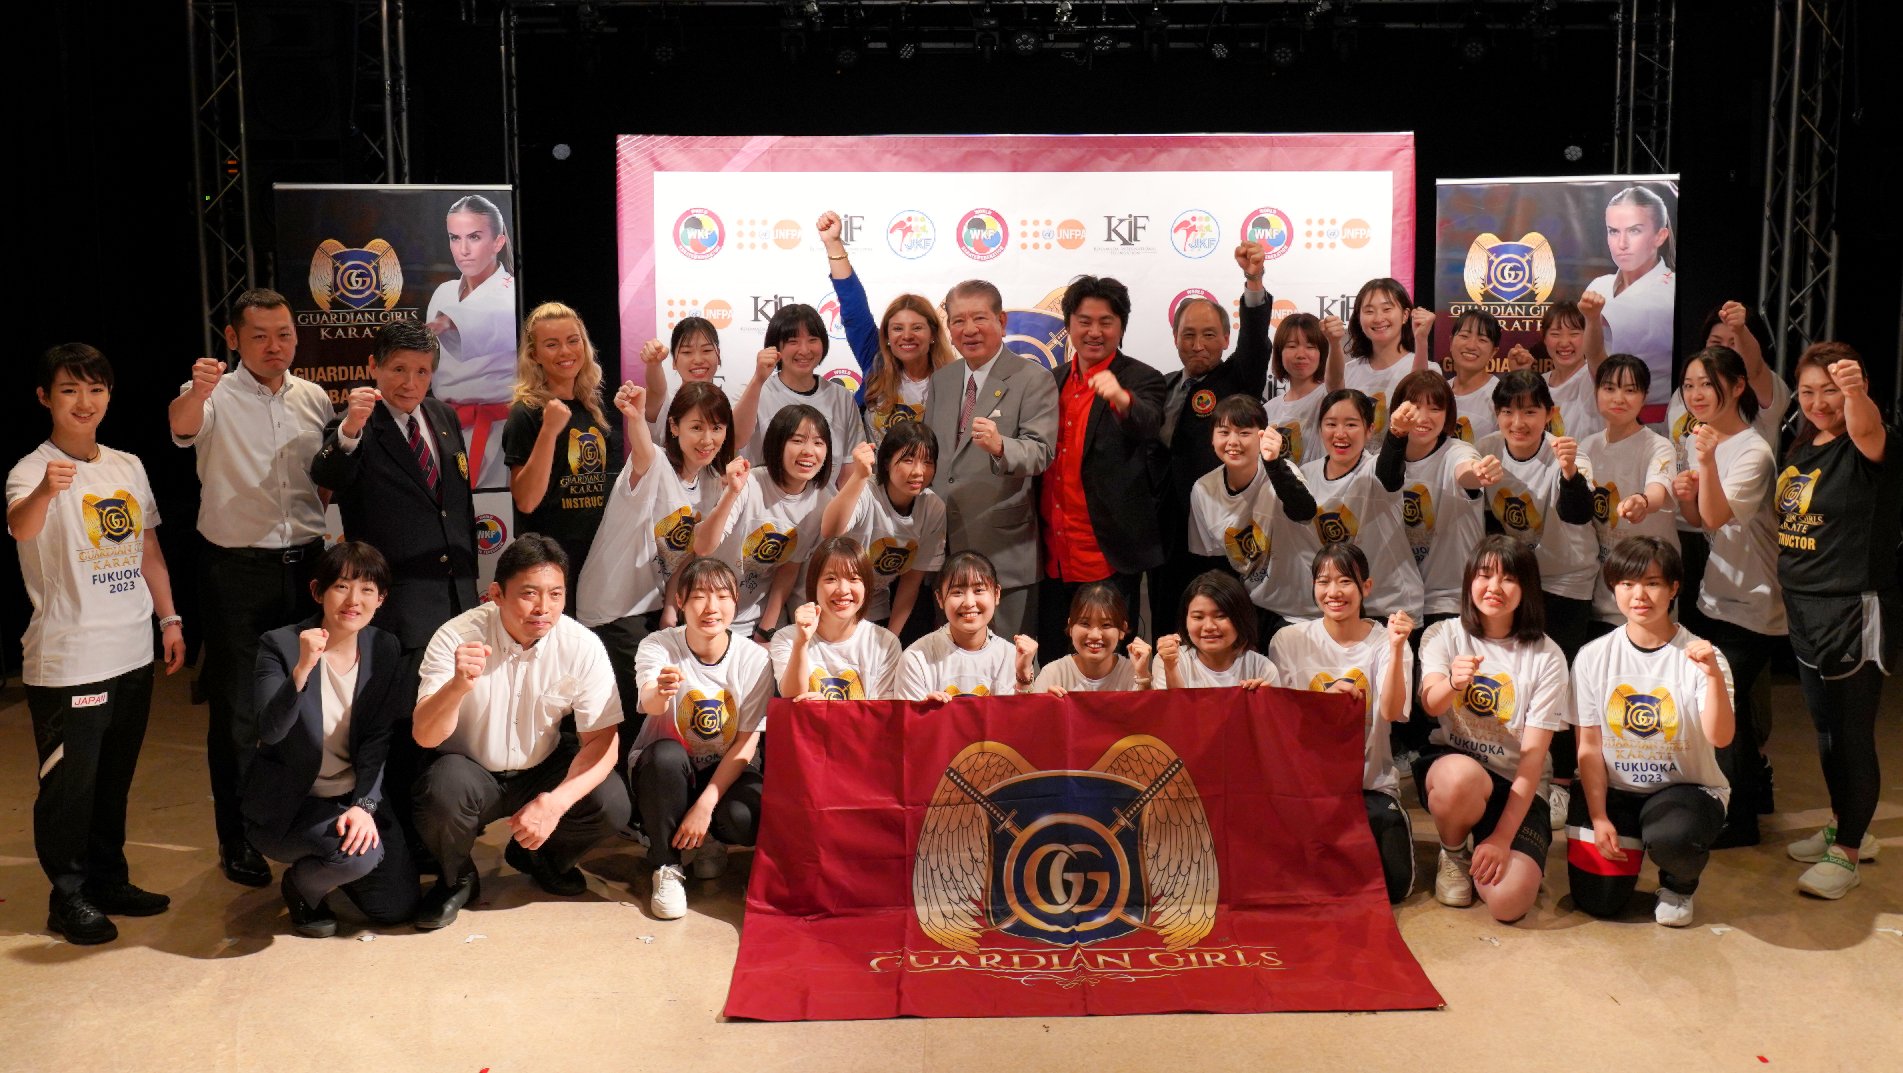 Success of Guardian Girls Global Karate Project continues with memorable event in Japan